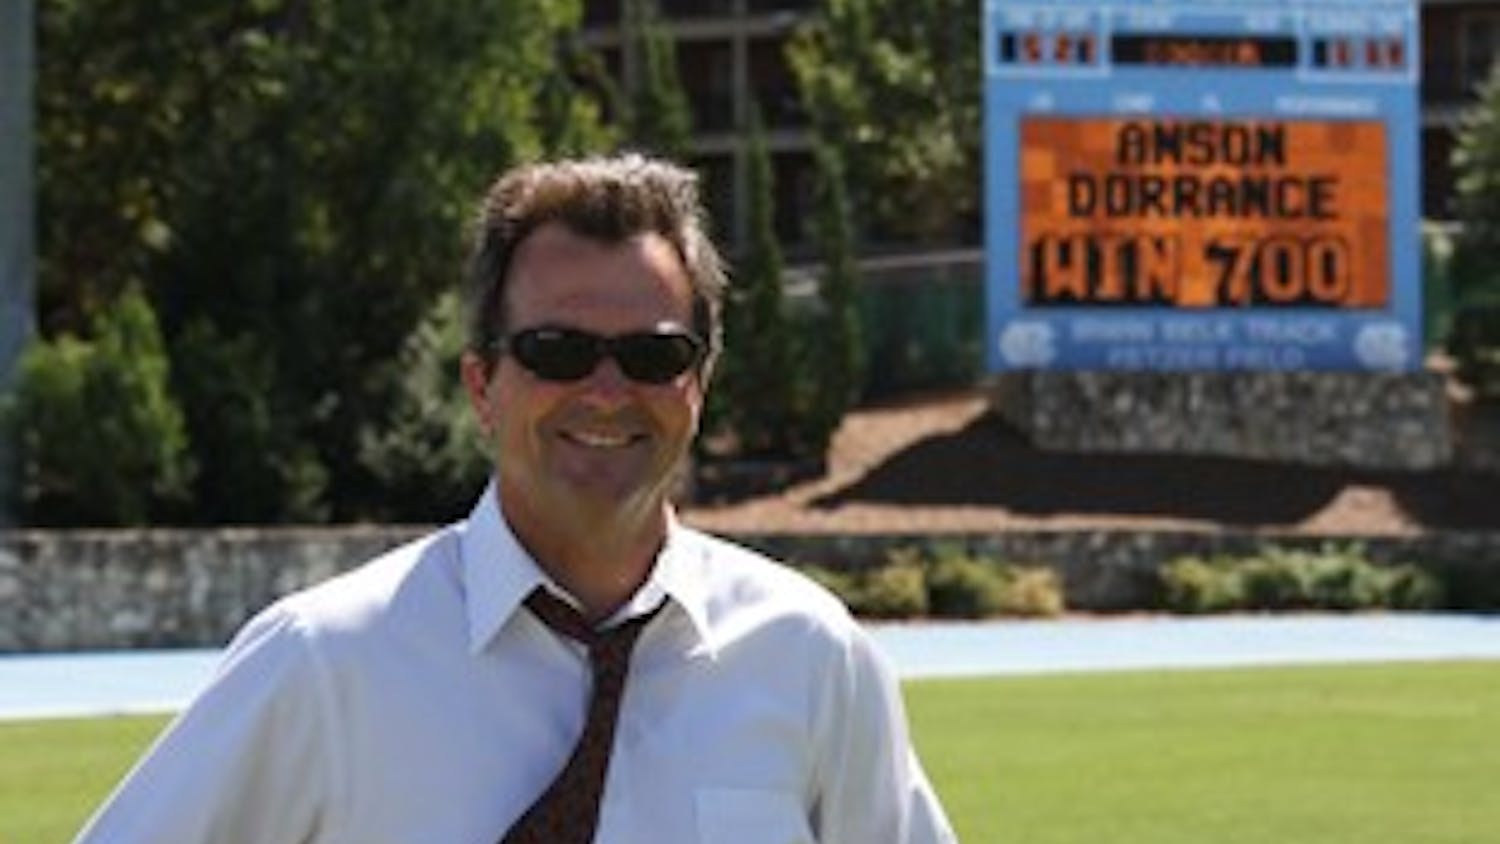 Anson Dorrance began the UNC women’s soccer program in 1979 and has since won 20 NCAA titles, more than any coach in the nation.